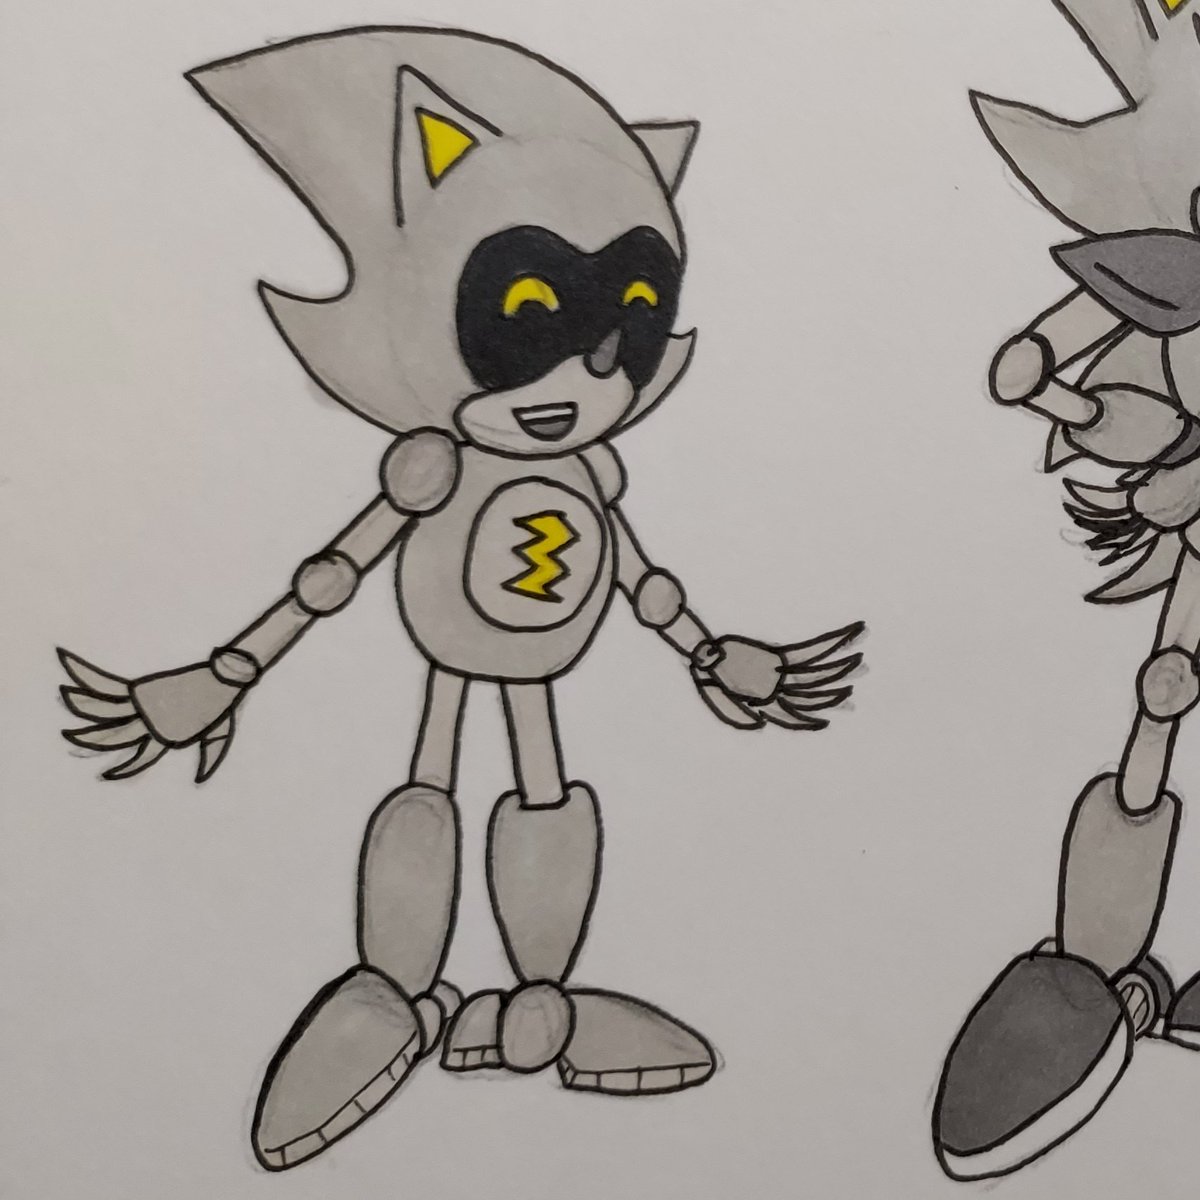 9. Sniper's current design is not how he was originally built. He had a "classic" body type which matched the rest of the OVA style, so he once had a stronger resemblance to Metal before he upgraded himself. His "younger" appearance differs slightly depending on the continuity.